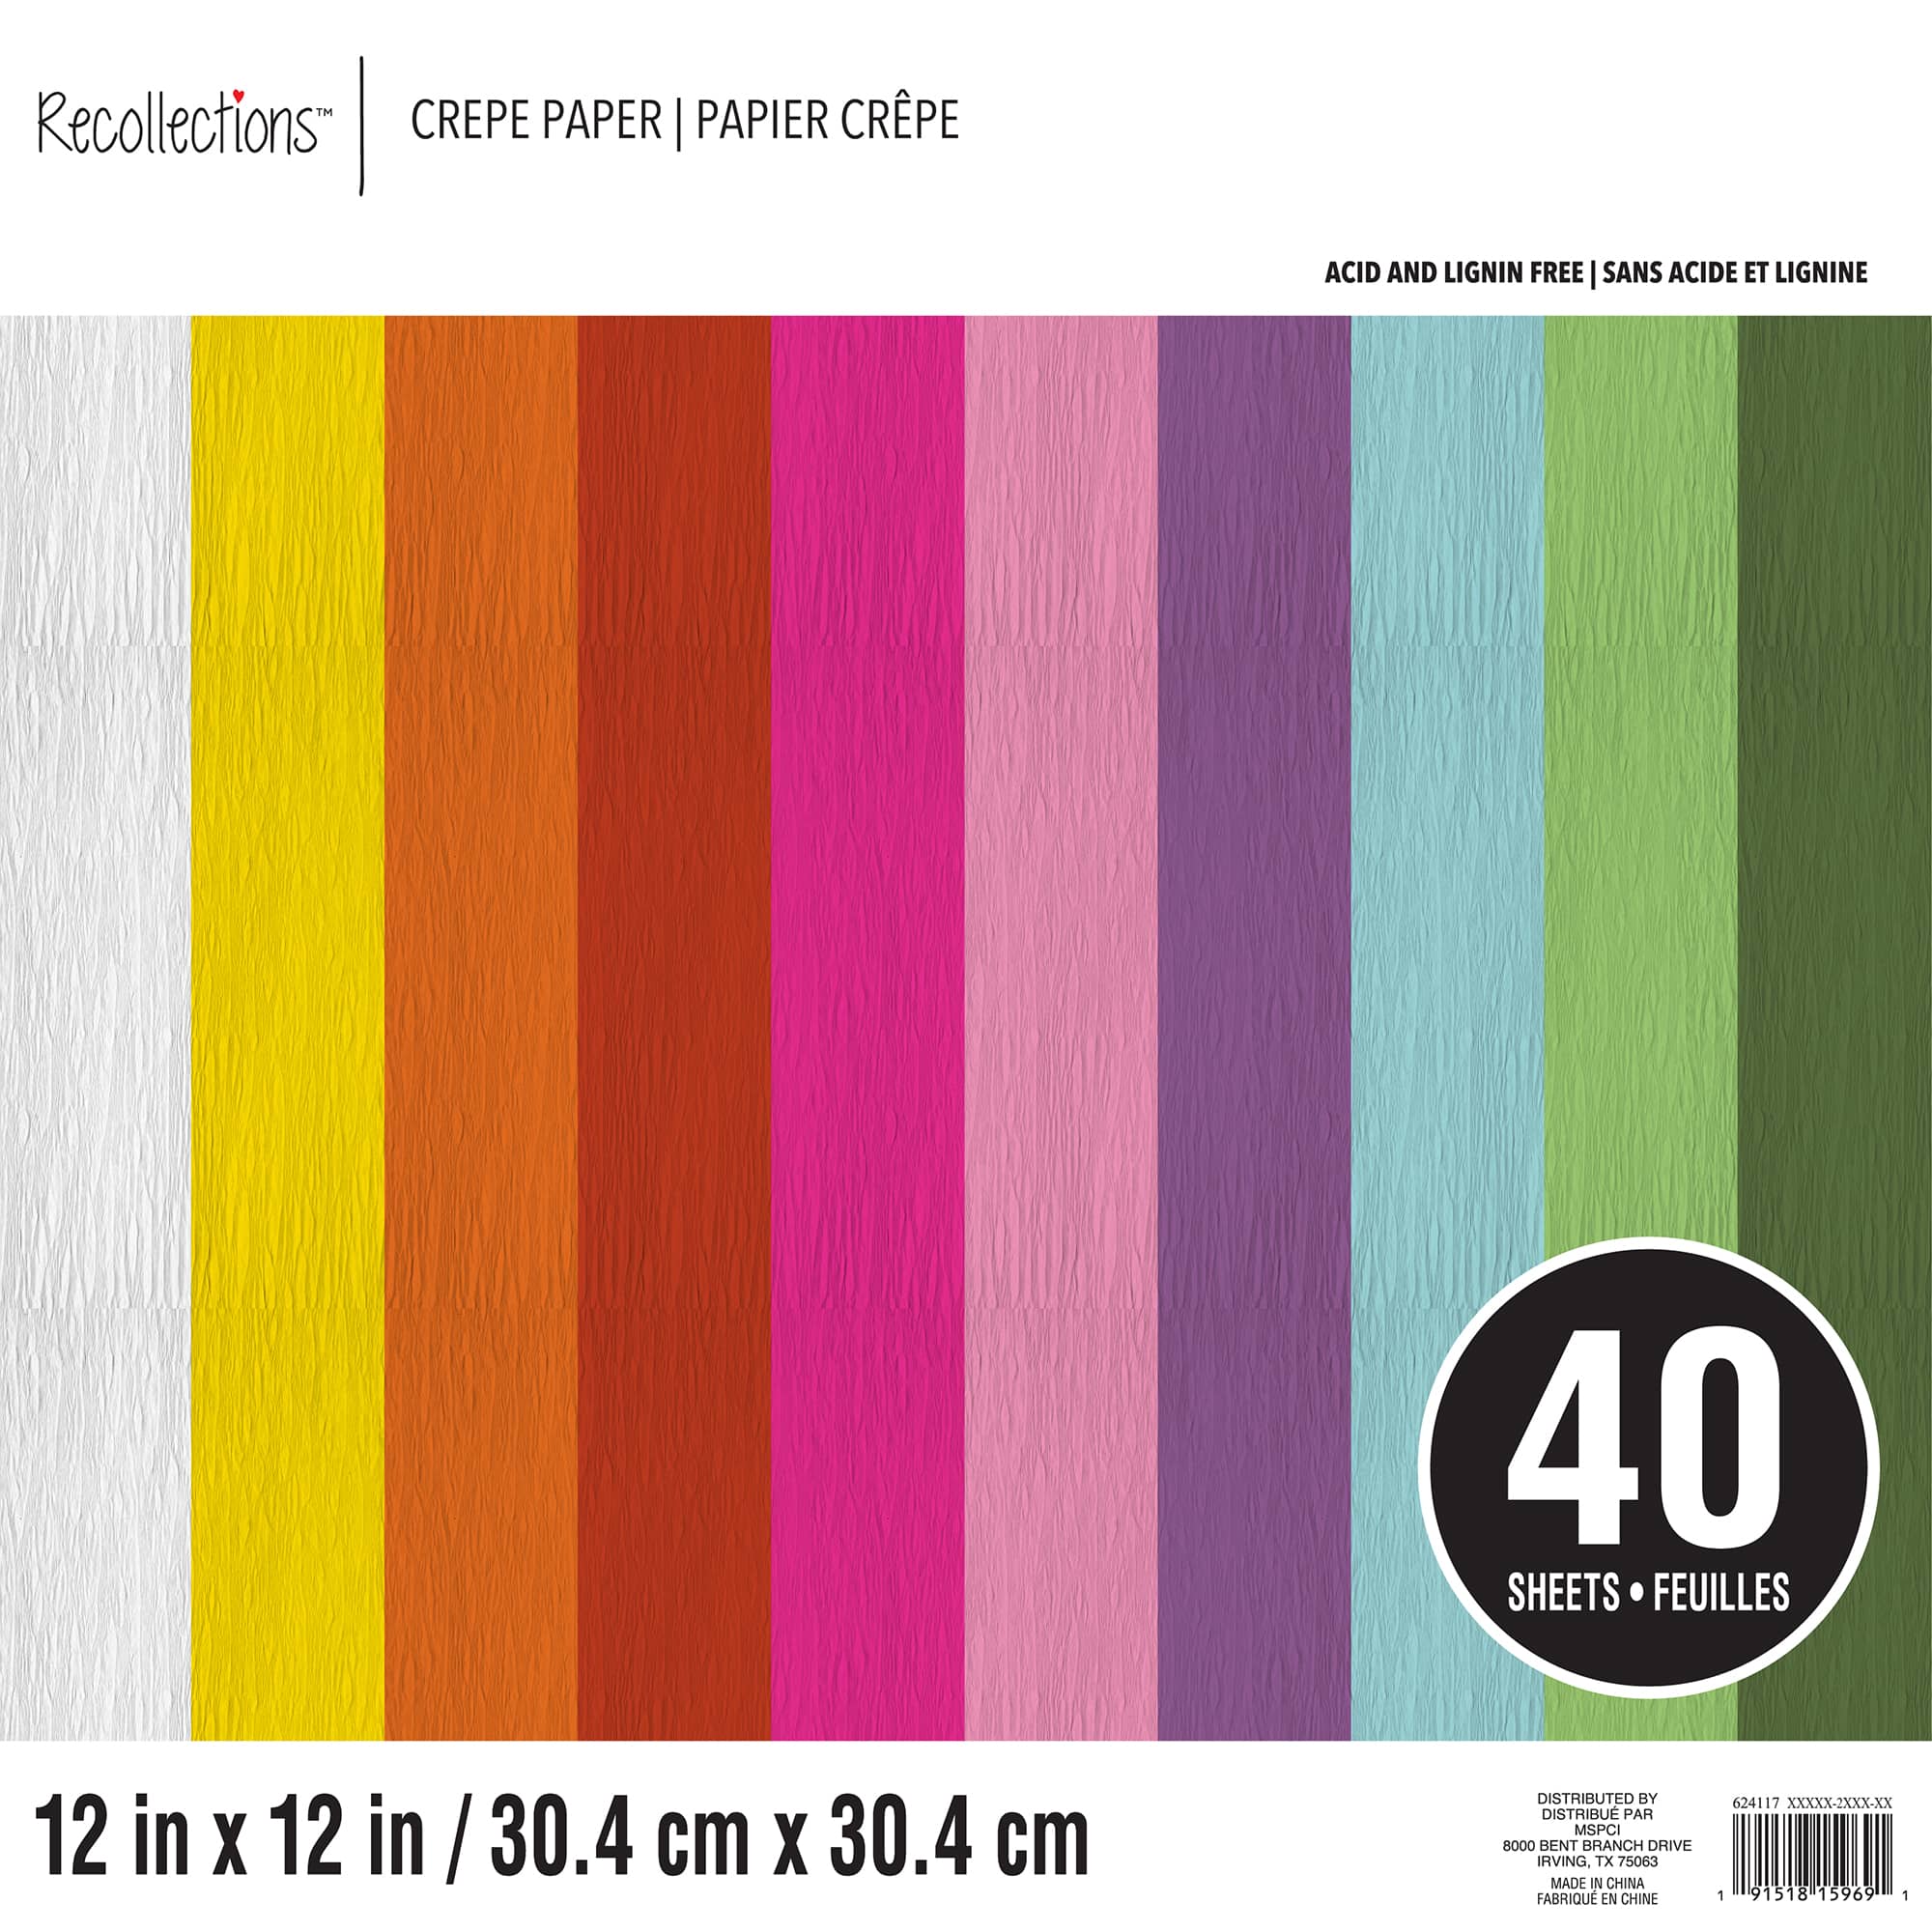 Fiesta 12 x 12 Crepe Paper by Recollections™, 40 Sheets